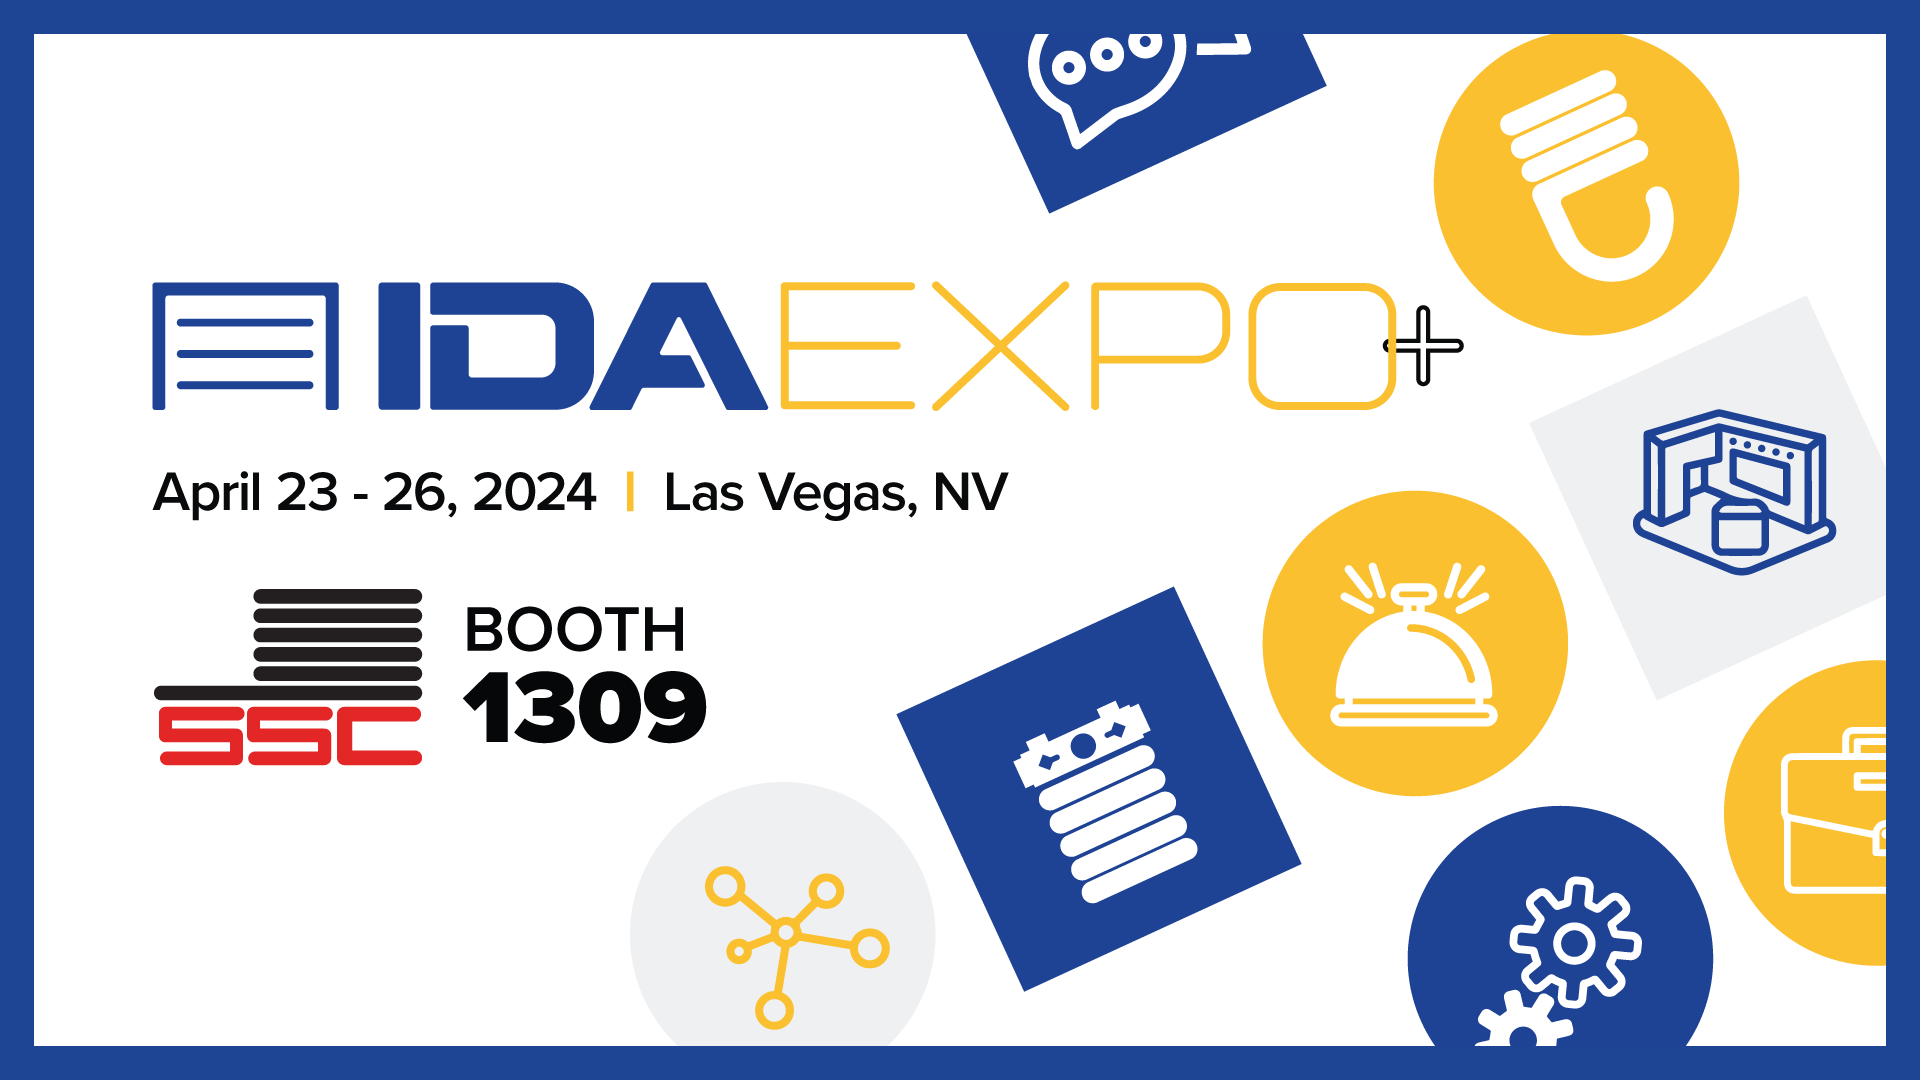 Join Us as IDA Expo+ at Booth 1309 April 23-26, 2024